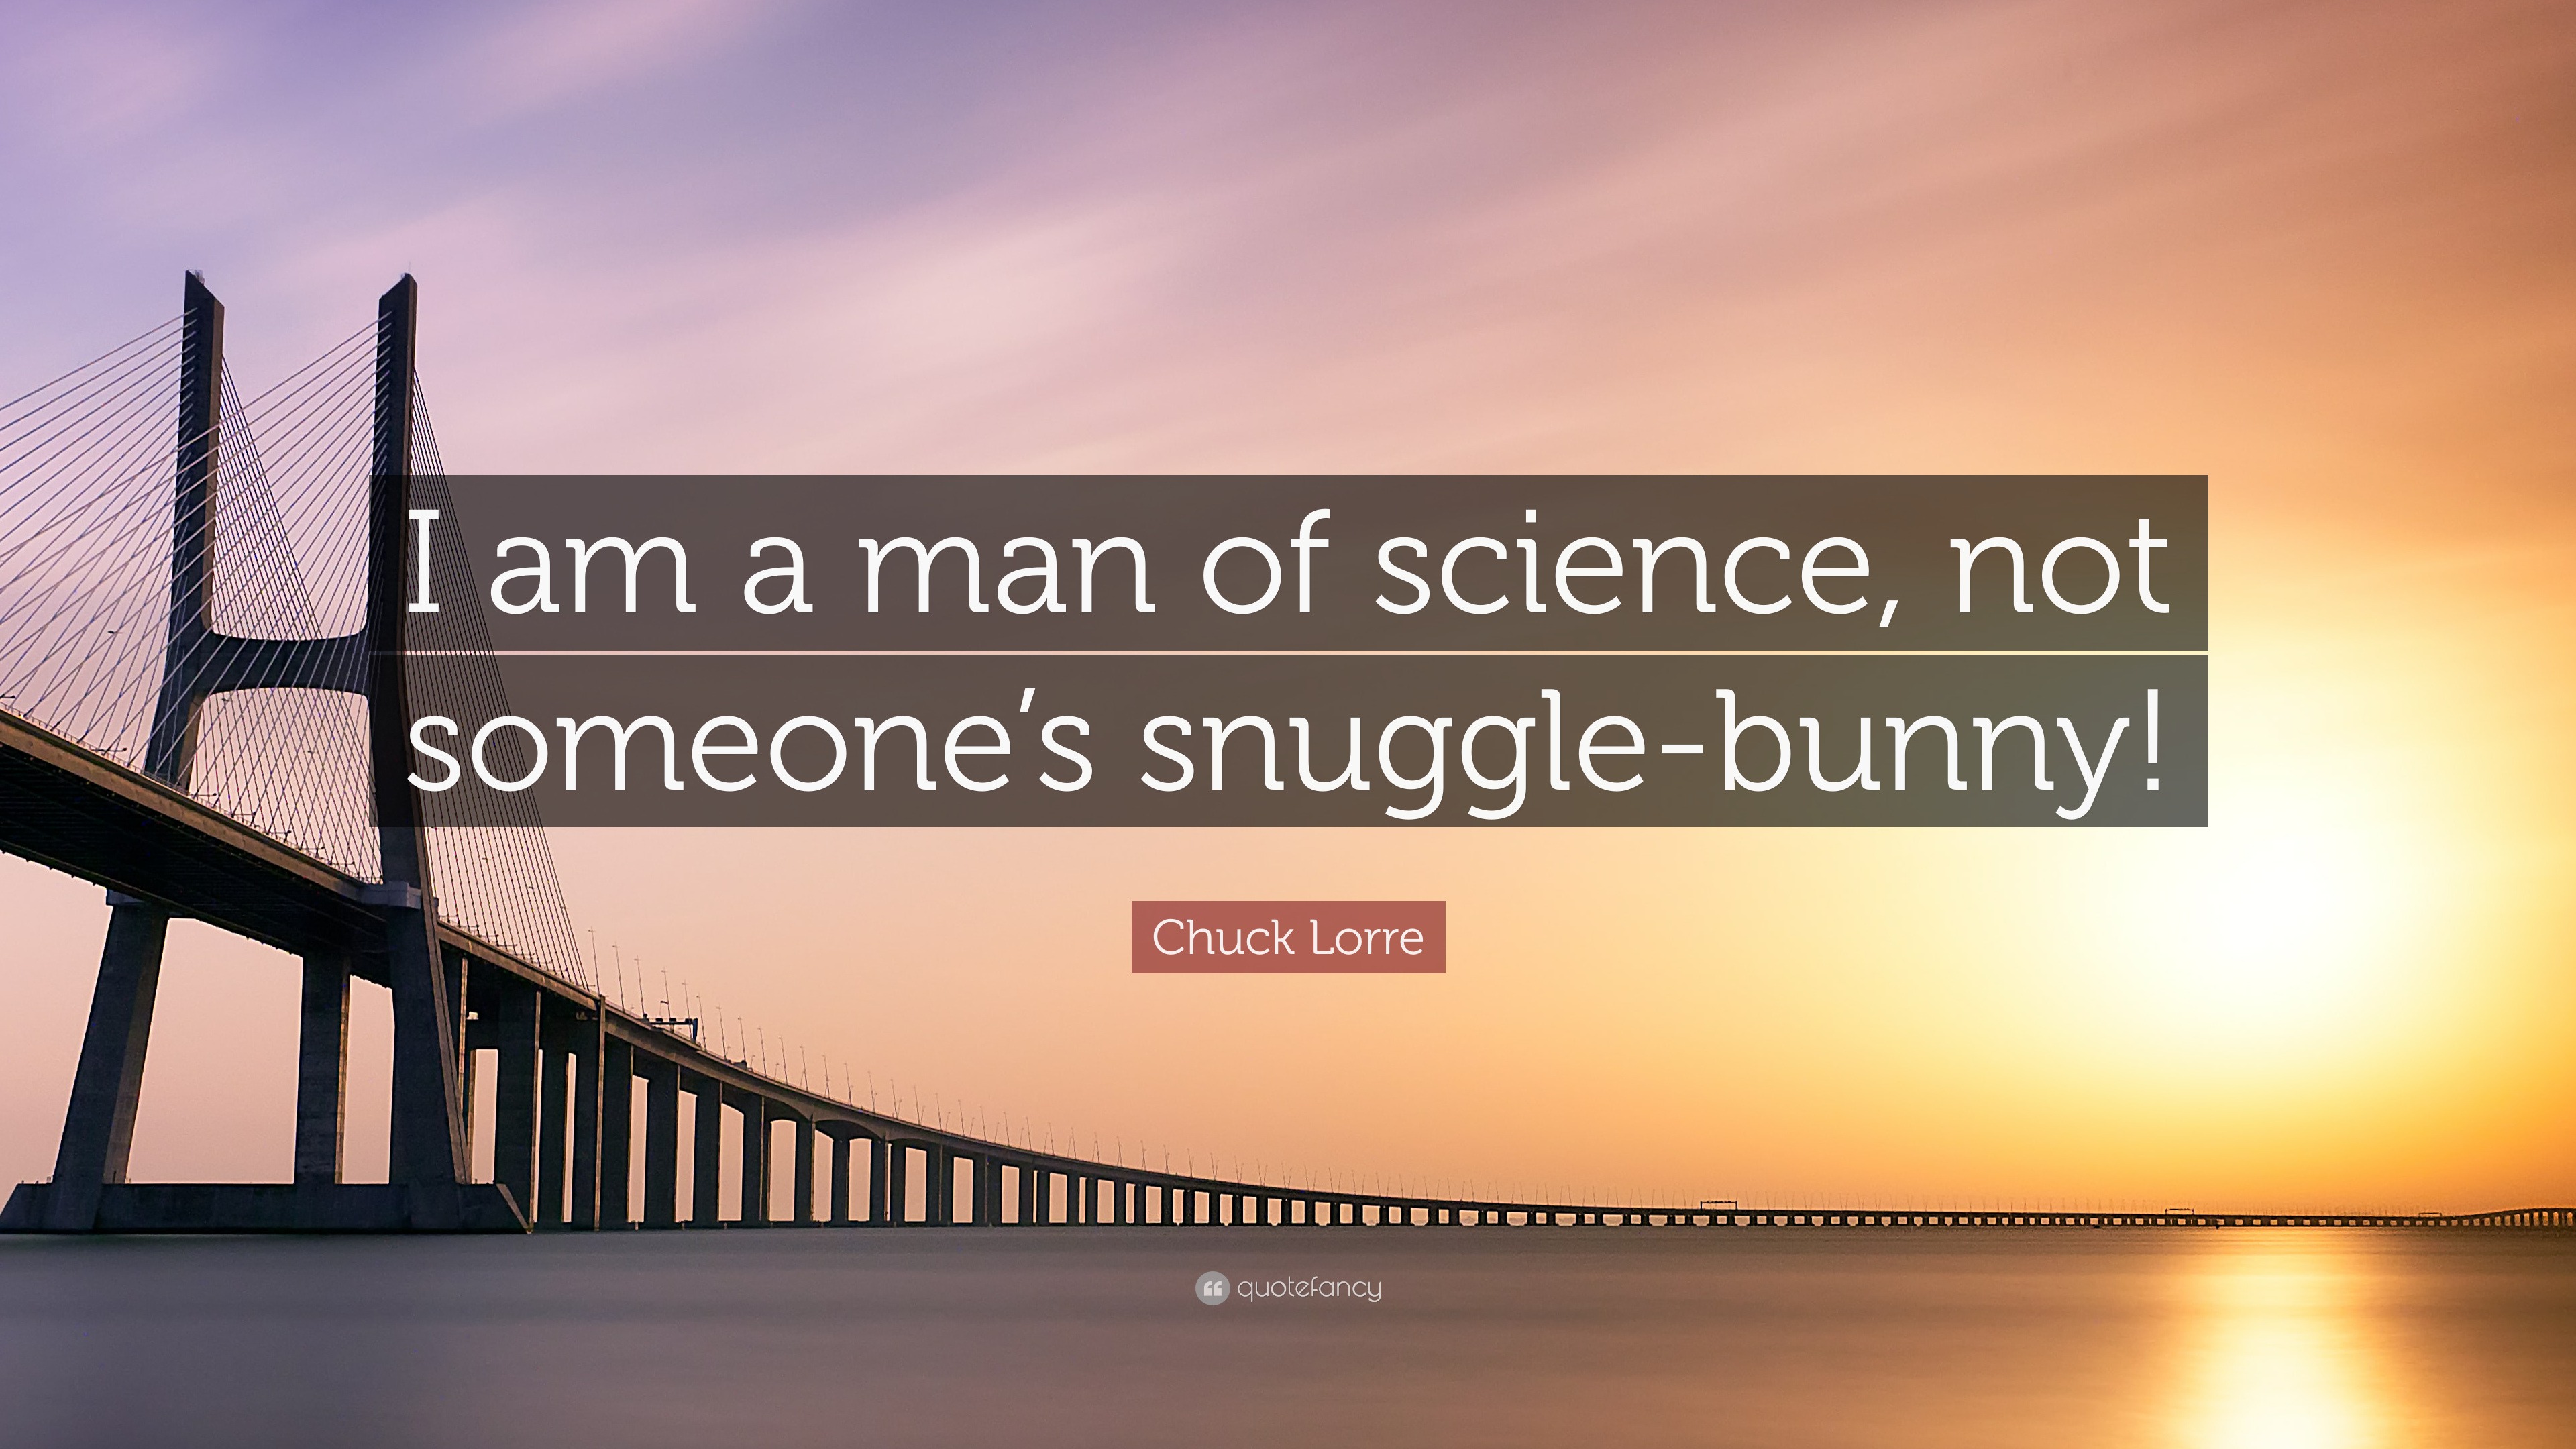 chuck quotes